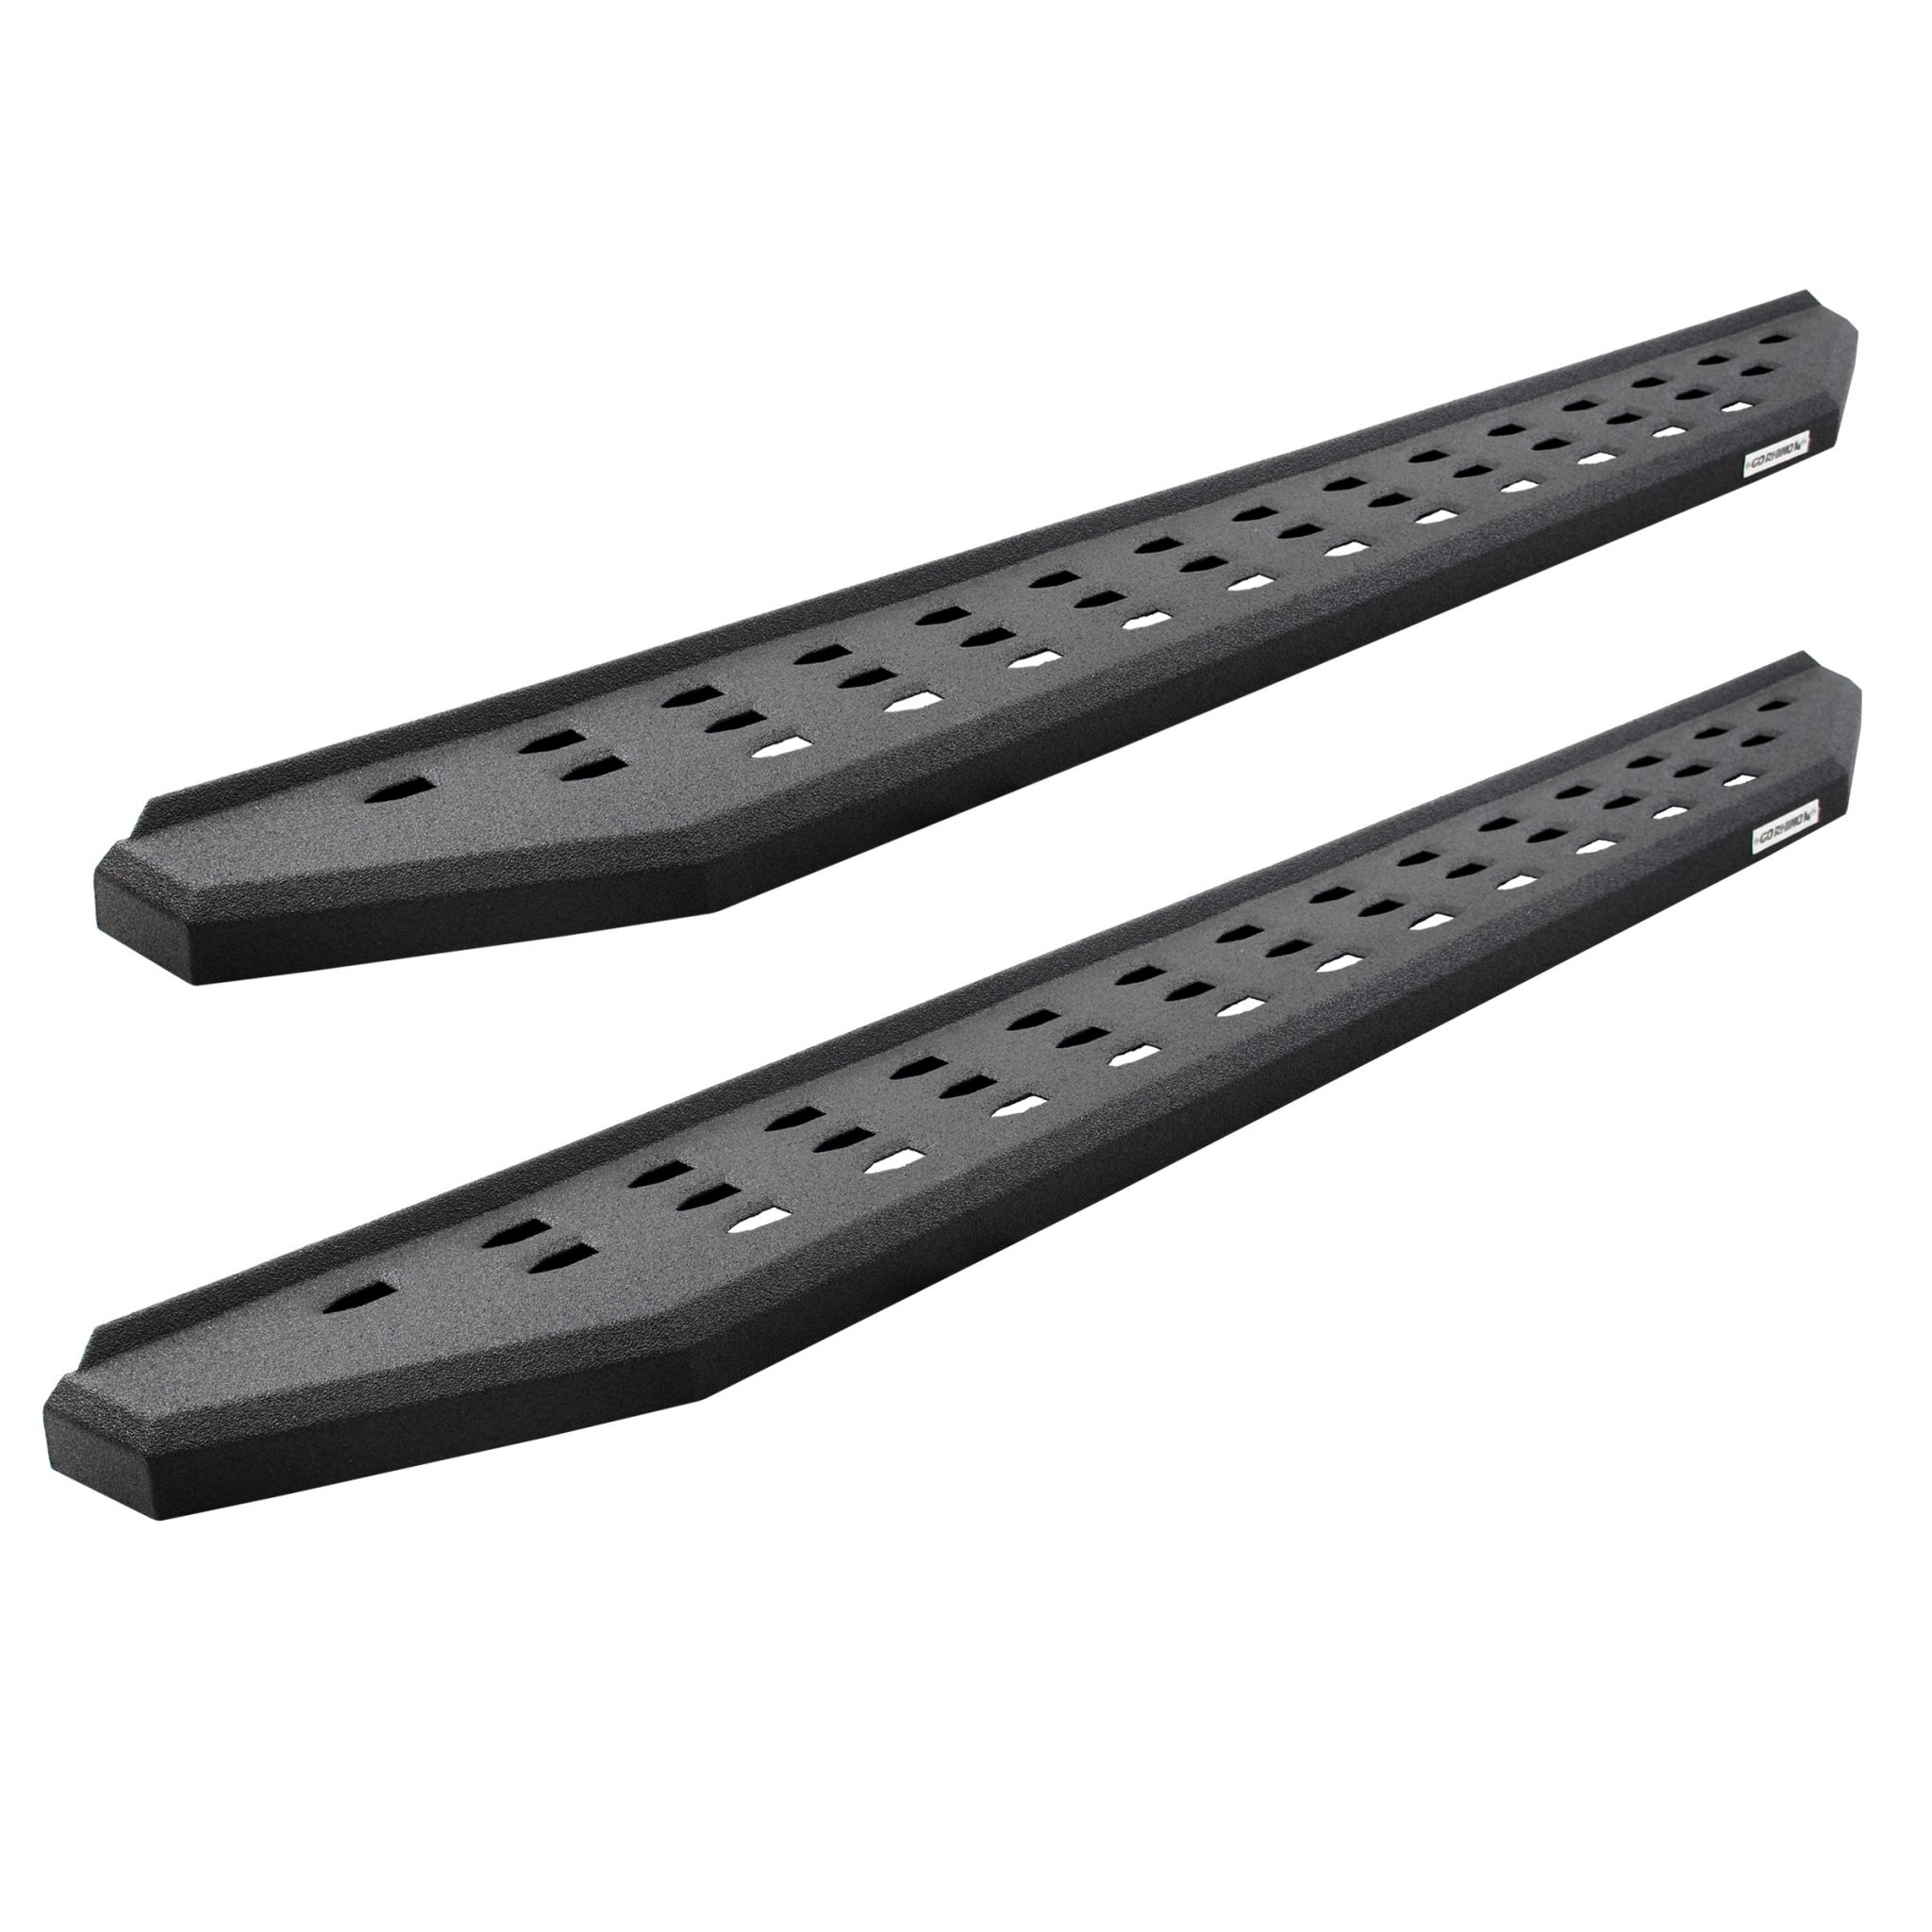 Go Rhino - 6940588020T - RB20 Running Boards With Mounting Brackets & 2 Pairs of Drop Steps Kit - Protective Bedliner Coating